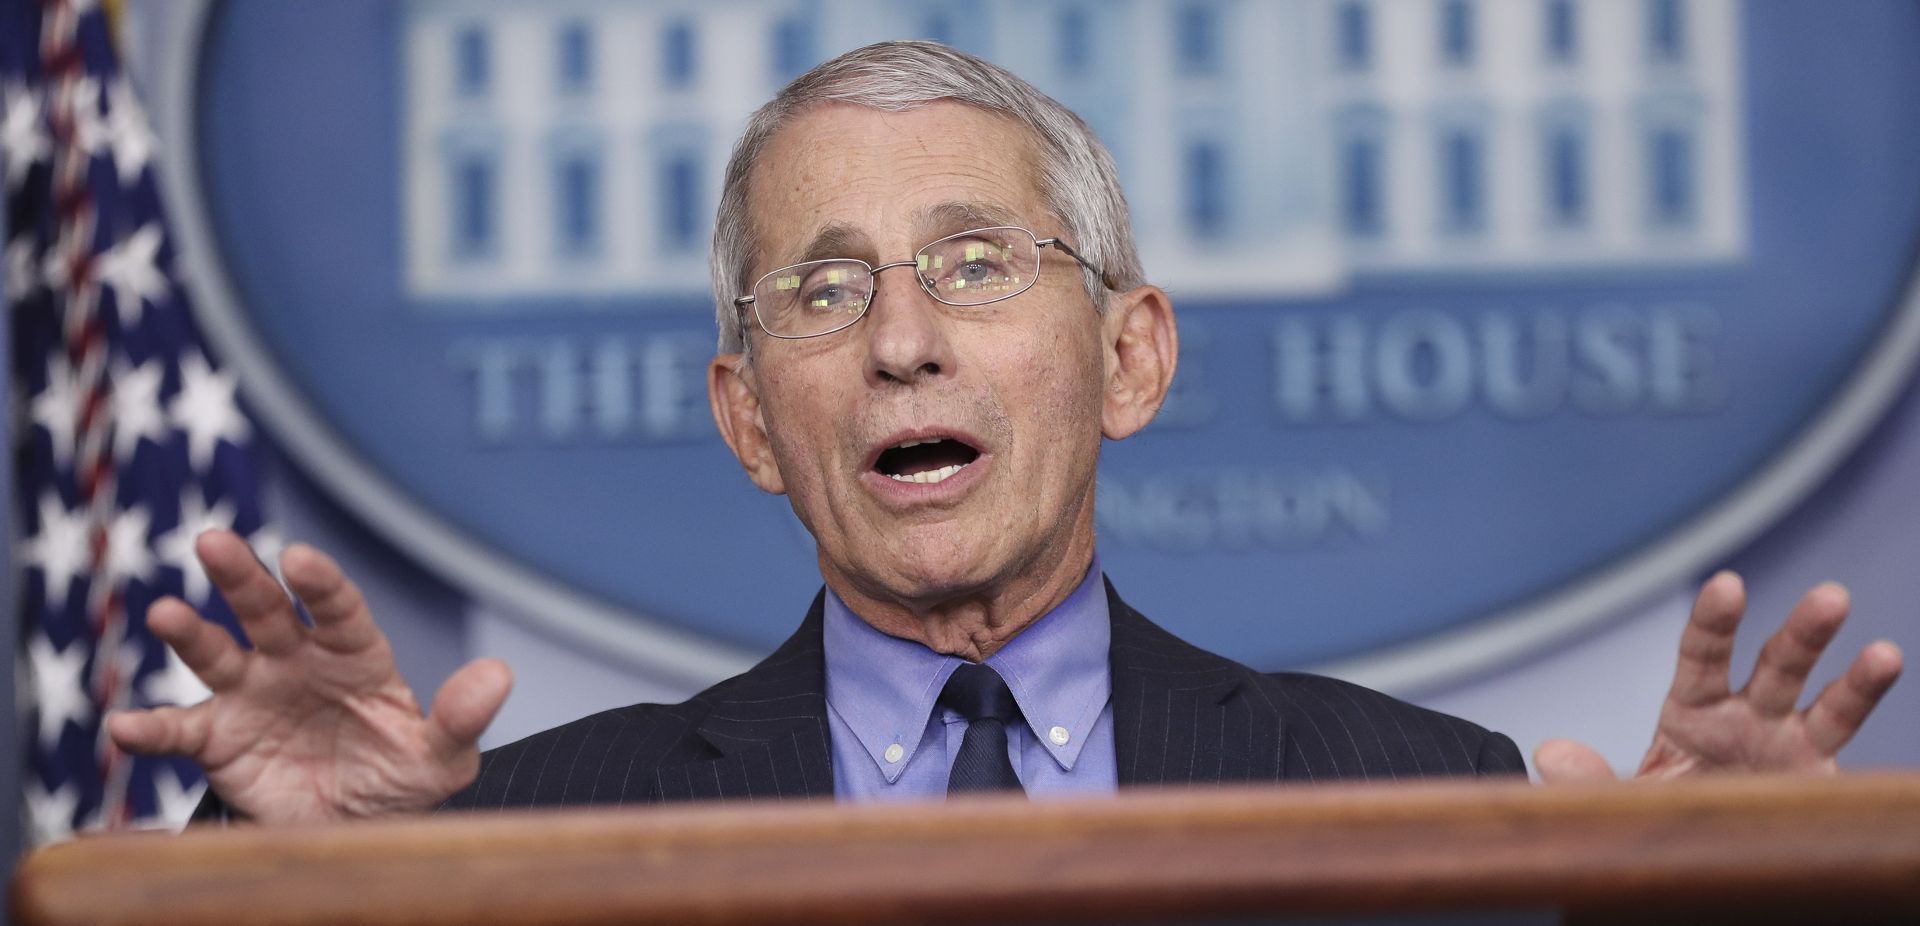 epa08369951 Dr. Anthony Fauci, director of the National Institute of Allergy and Infectious Diseases speaks during a press briefing with members of the coronavirus task force in the Brady Press Briefing Room of the White House in Washington, DC, USA, 17 April 2020.  EPA/Oliver Contreras / POOL